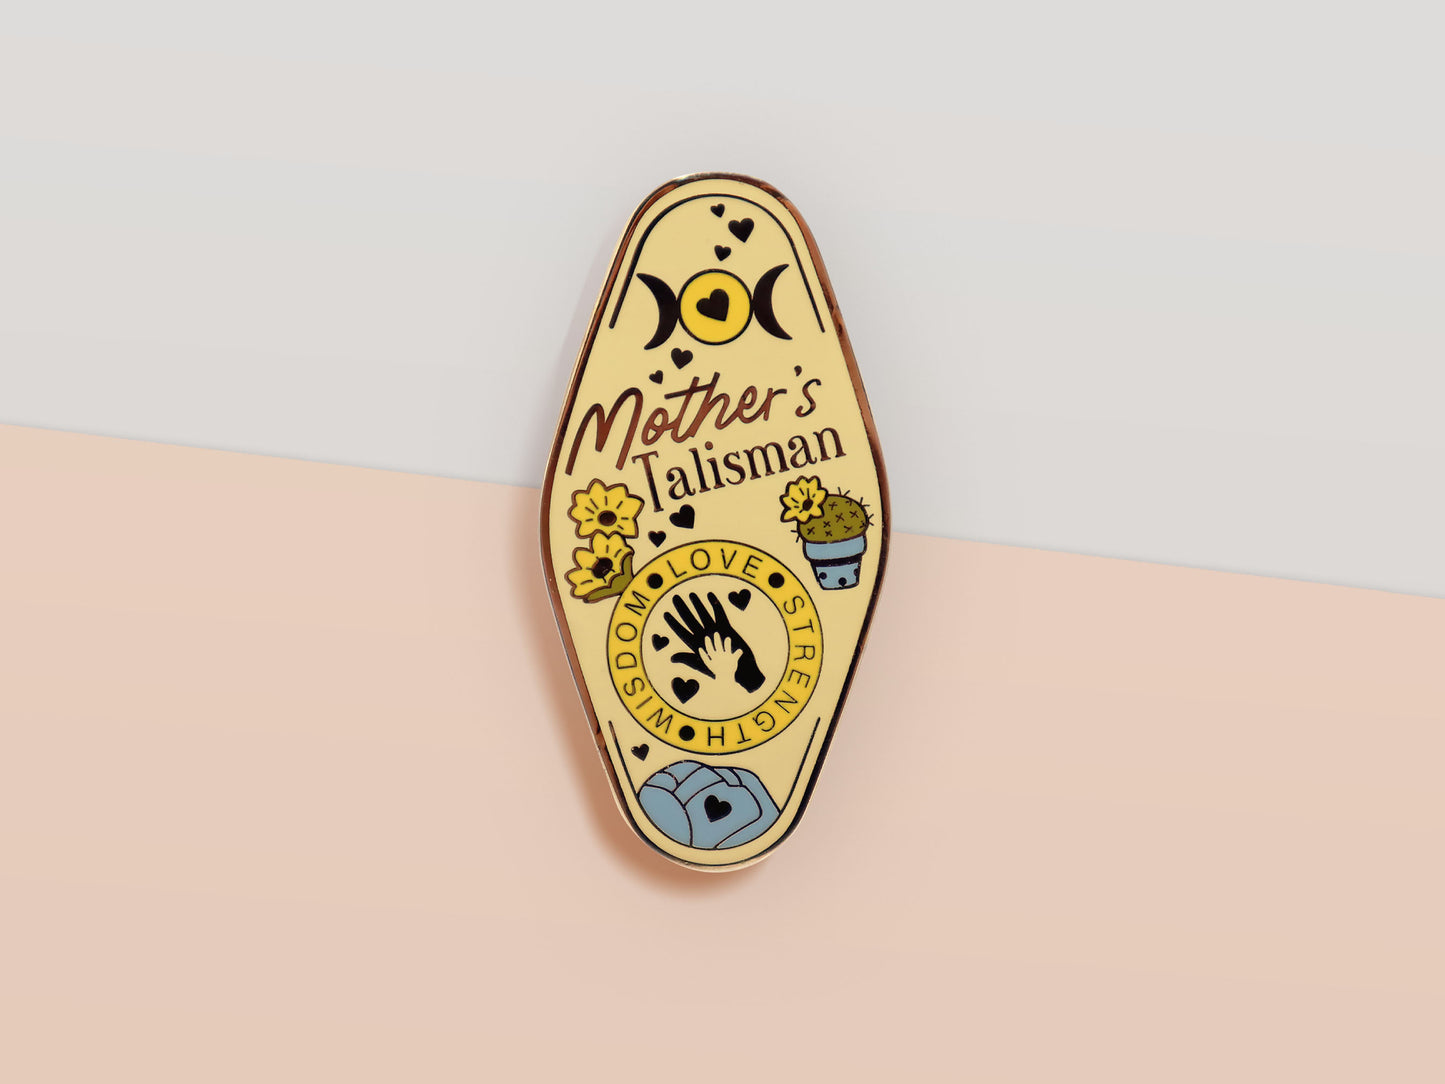 Gold Enamel Talisman Pin with yellow design and the words Mother's Talisman, Wisdom Love Strength. The pins design includes a a mother and child's hand, the three mothers moons, as well as flowers and crystals.